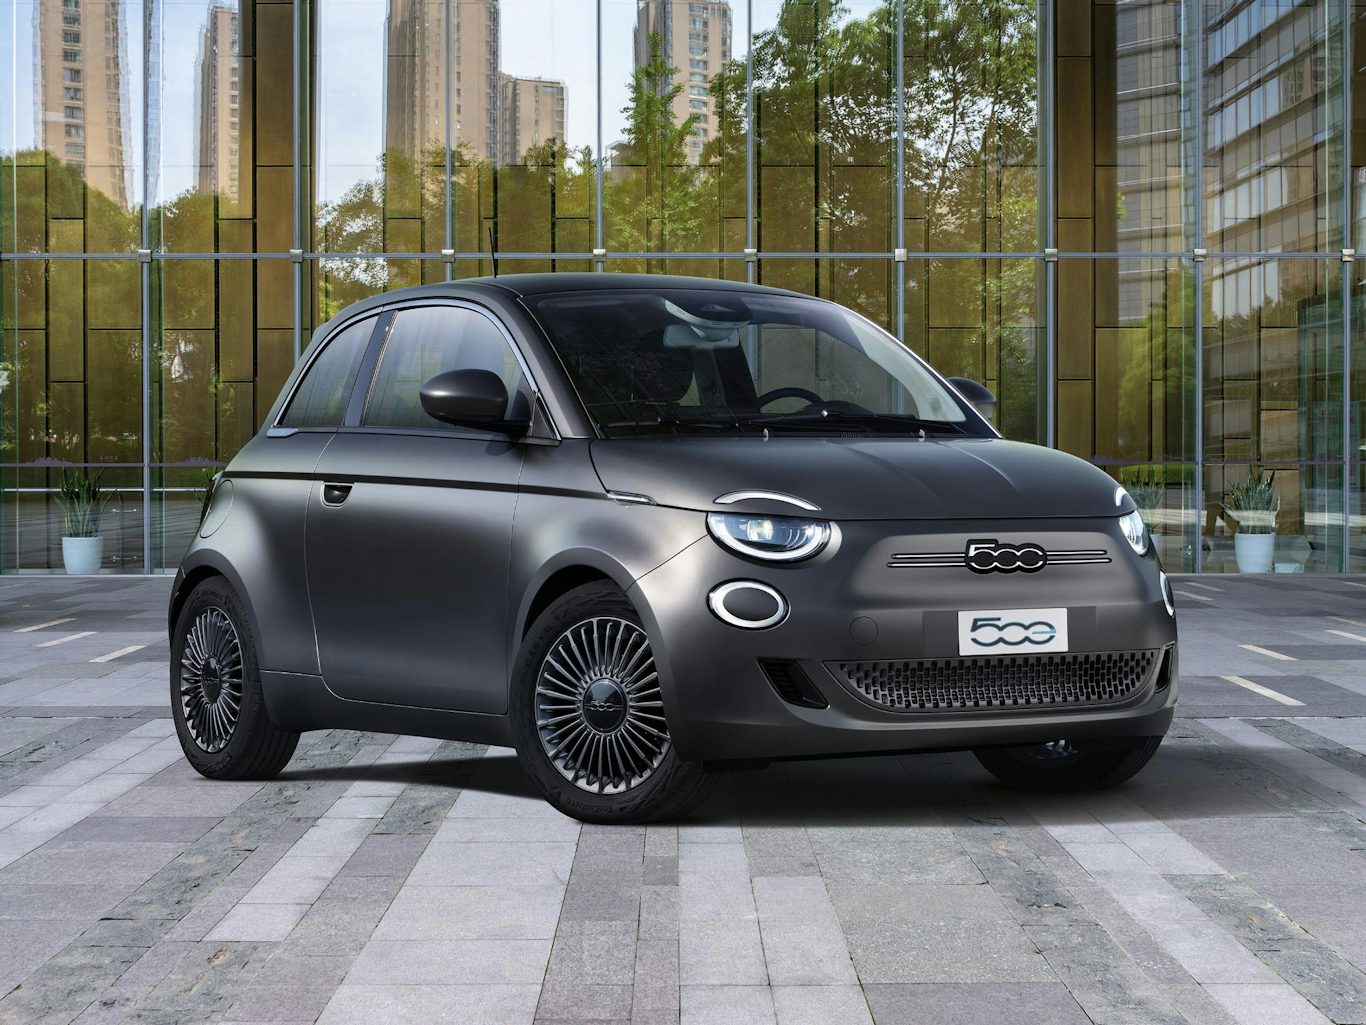 new-fiat-500-and-500c-electric-car-prices-announced-specs-and-release